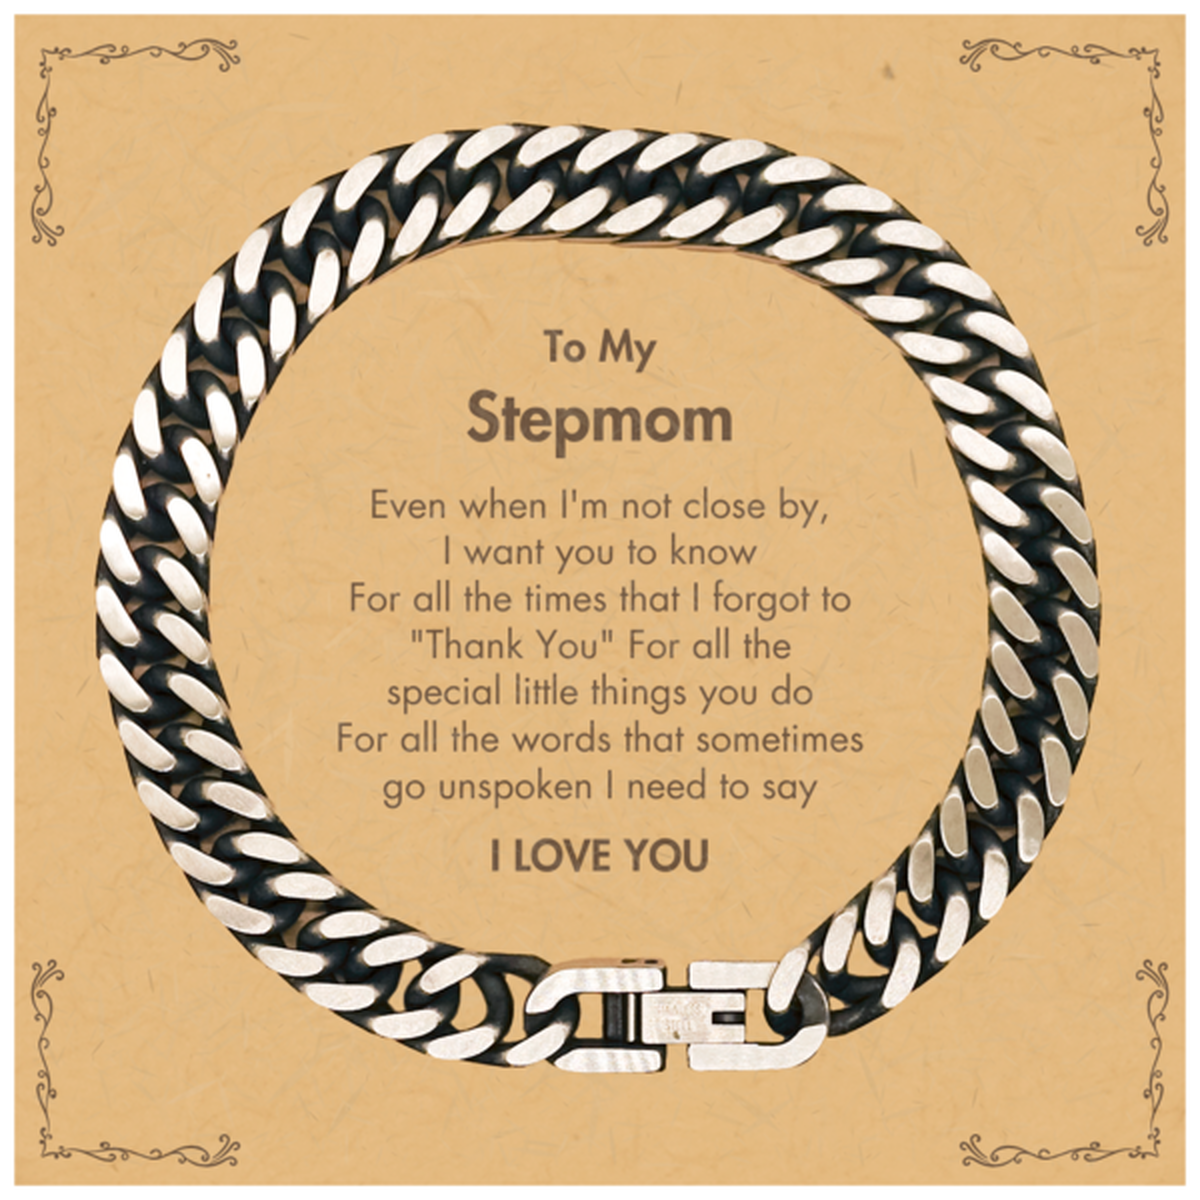 Thank You Gifts for Stepmom, Keepsake Cuban Link Chain Bracelet Gifts for Stepmom Birthday Mother's day Father's Day Stepmom For all the words That sometimes go unspoken I need to say I LOVE YOU